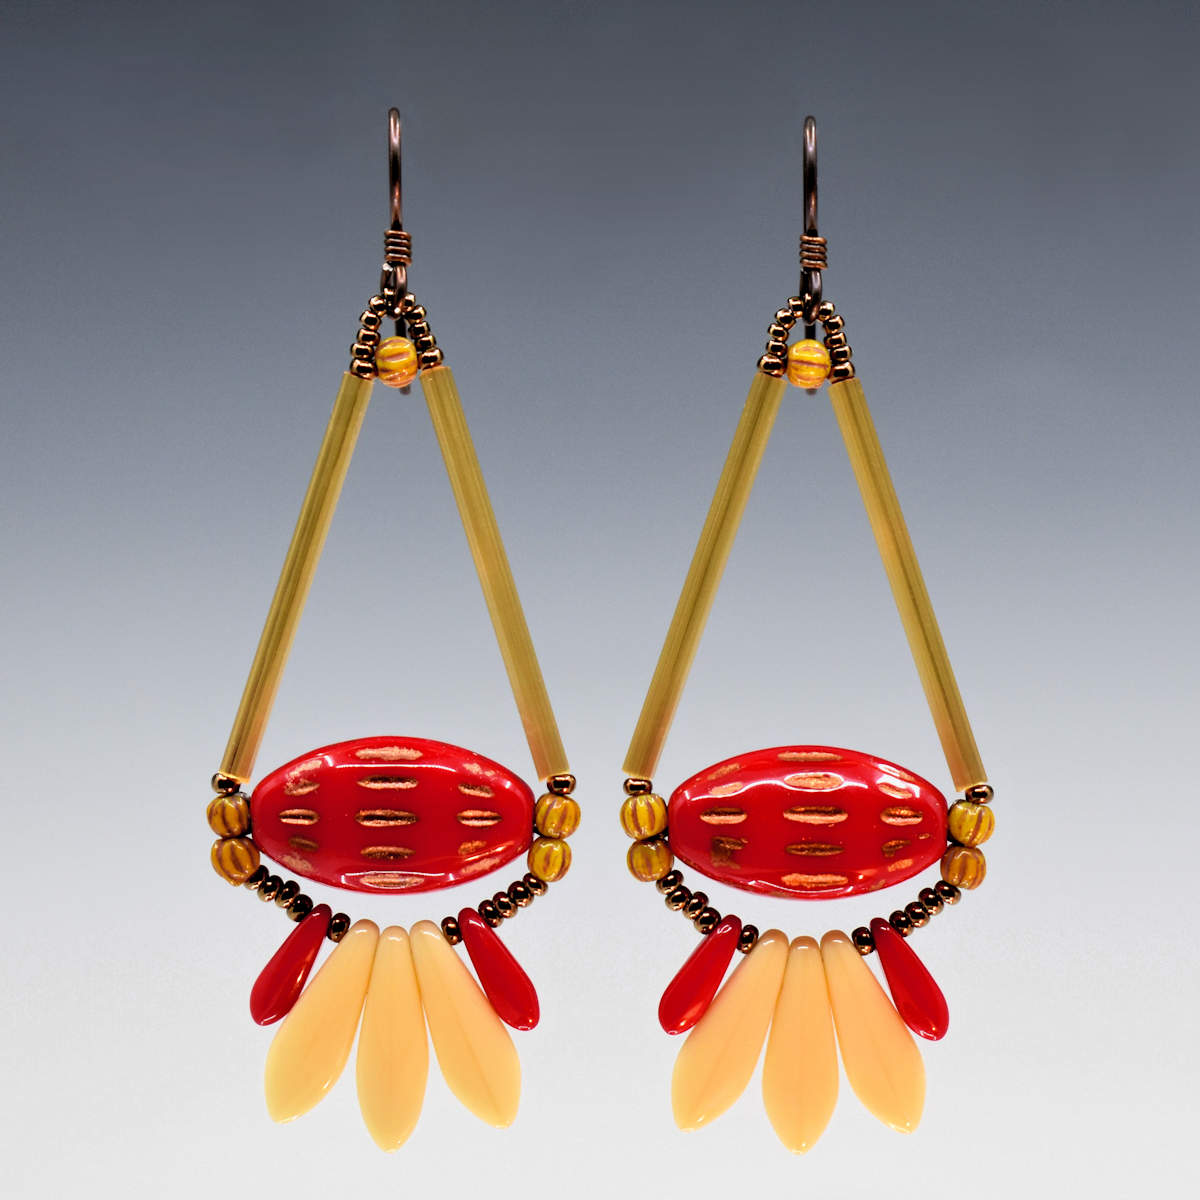 Long red and cream earrings shaped like teardrops with a tail feathe against a gray background. The earrings have dark wires and are formed from two long yellow-gold tube beads that form the top of a teardrop with a wide glossy red oval with pointed ends and horizontally running copper dash marks. Below the teardrop shape is a fan of three cream dagger beads sandwiched between two smaller red daggers. The earrings have dark ear wires.